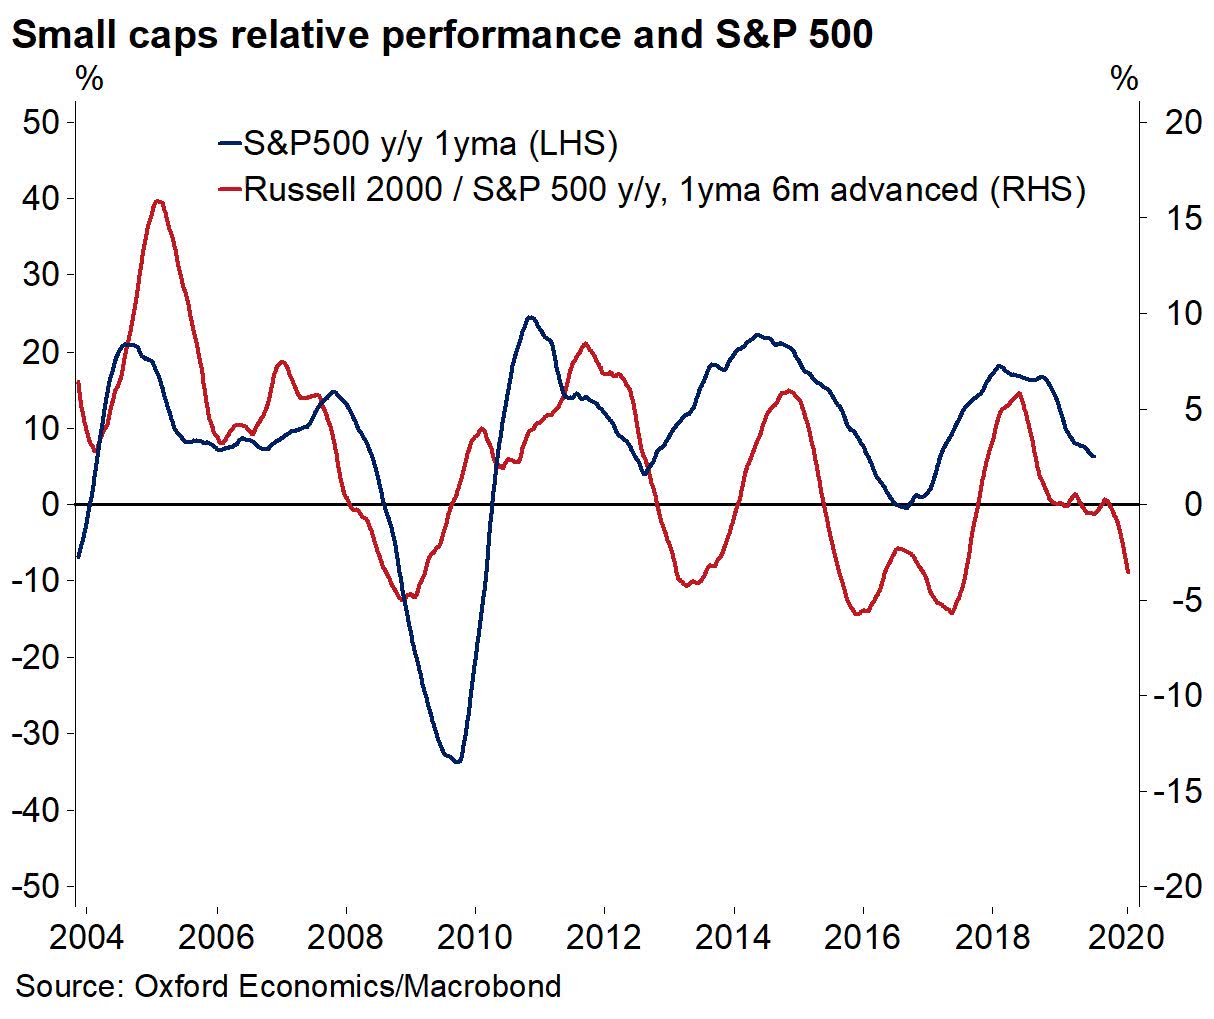 Small Caps Relative Performance Leads the S&P 500 Index